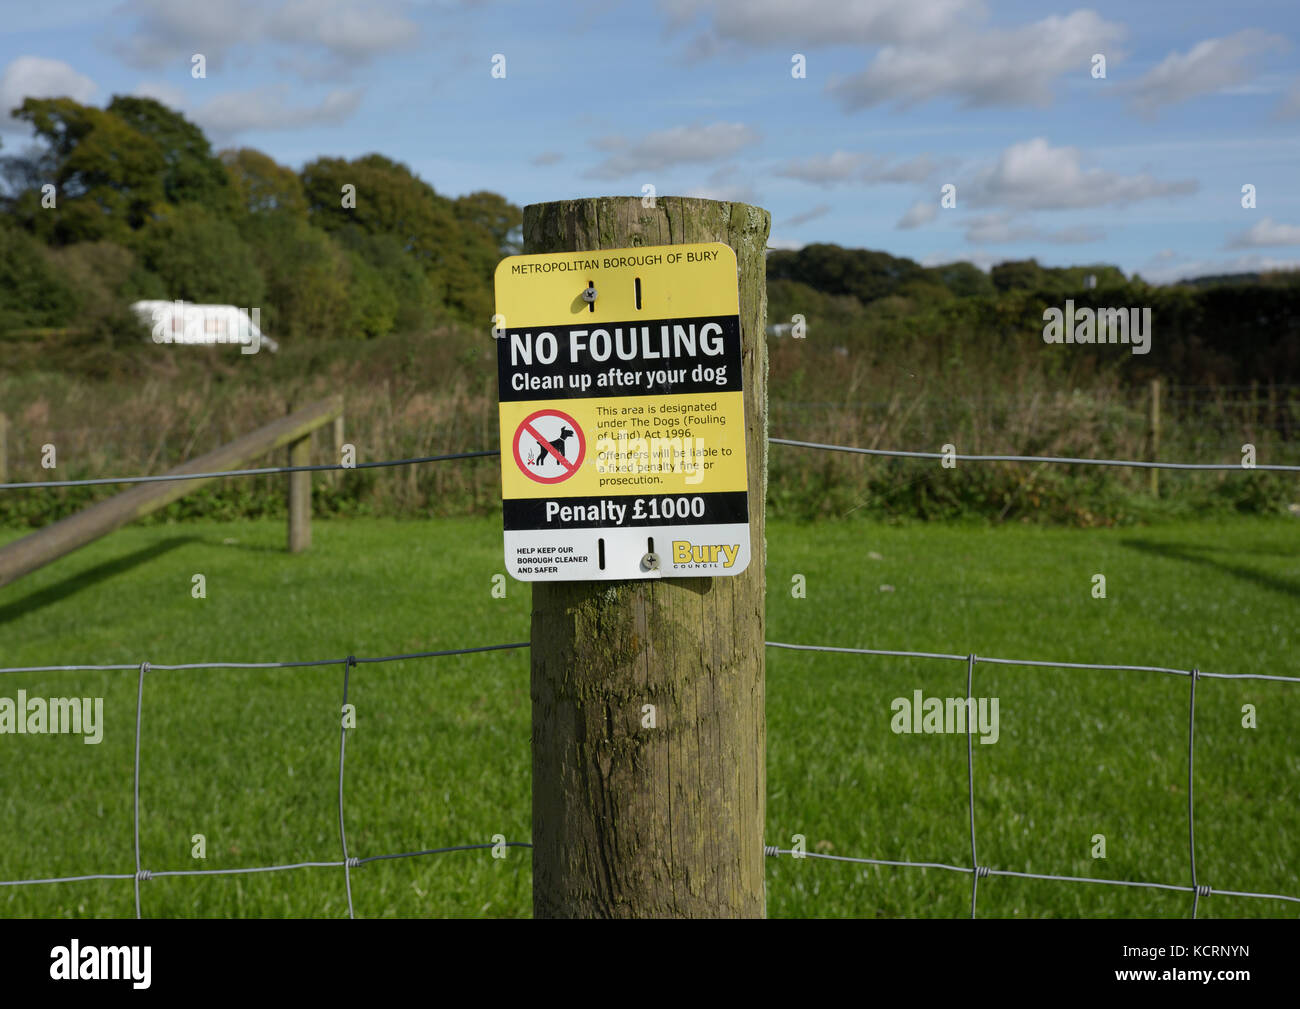 No fouling notice on wooden fence post in Burrs country park bury lancashire uk Stock Photo